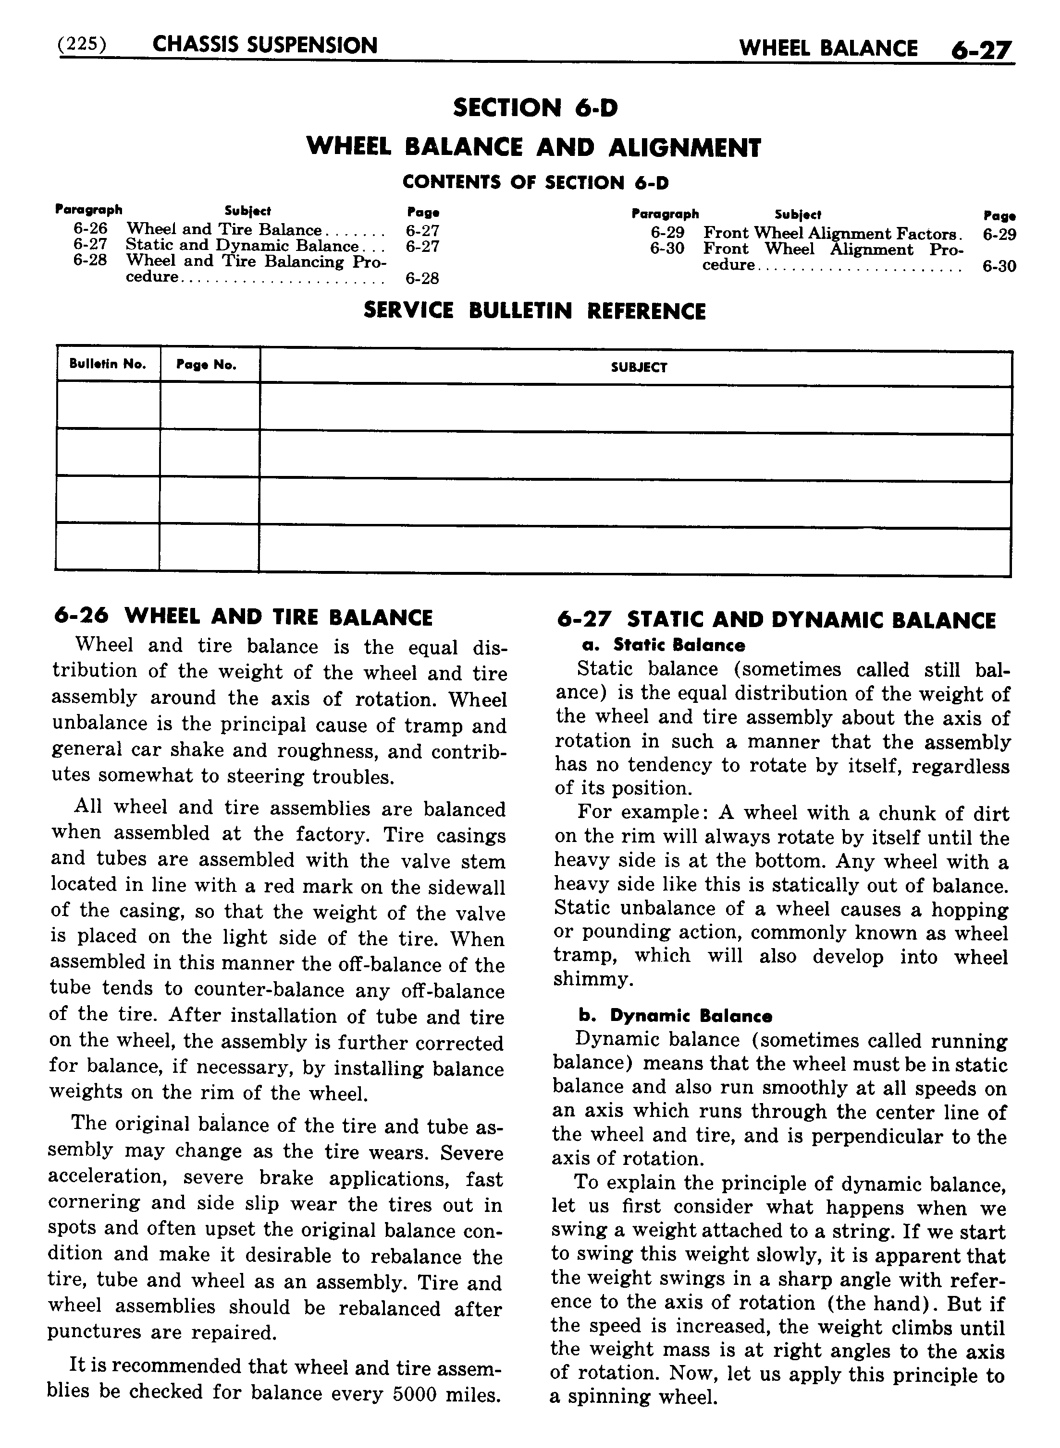 n_07 1948 Buick Shop Manual - Chassis Suspension-027-027.jpg